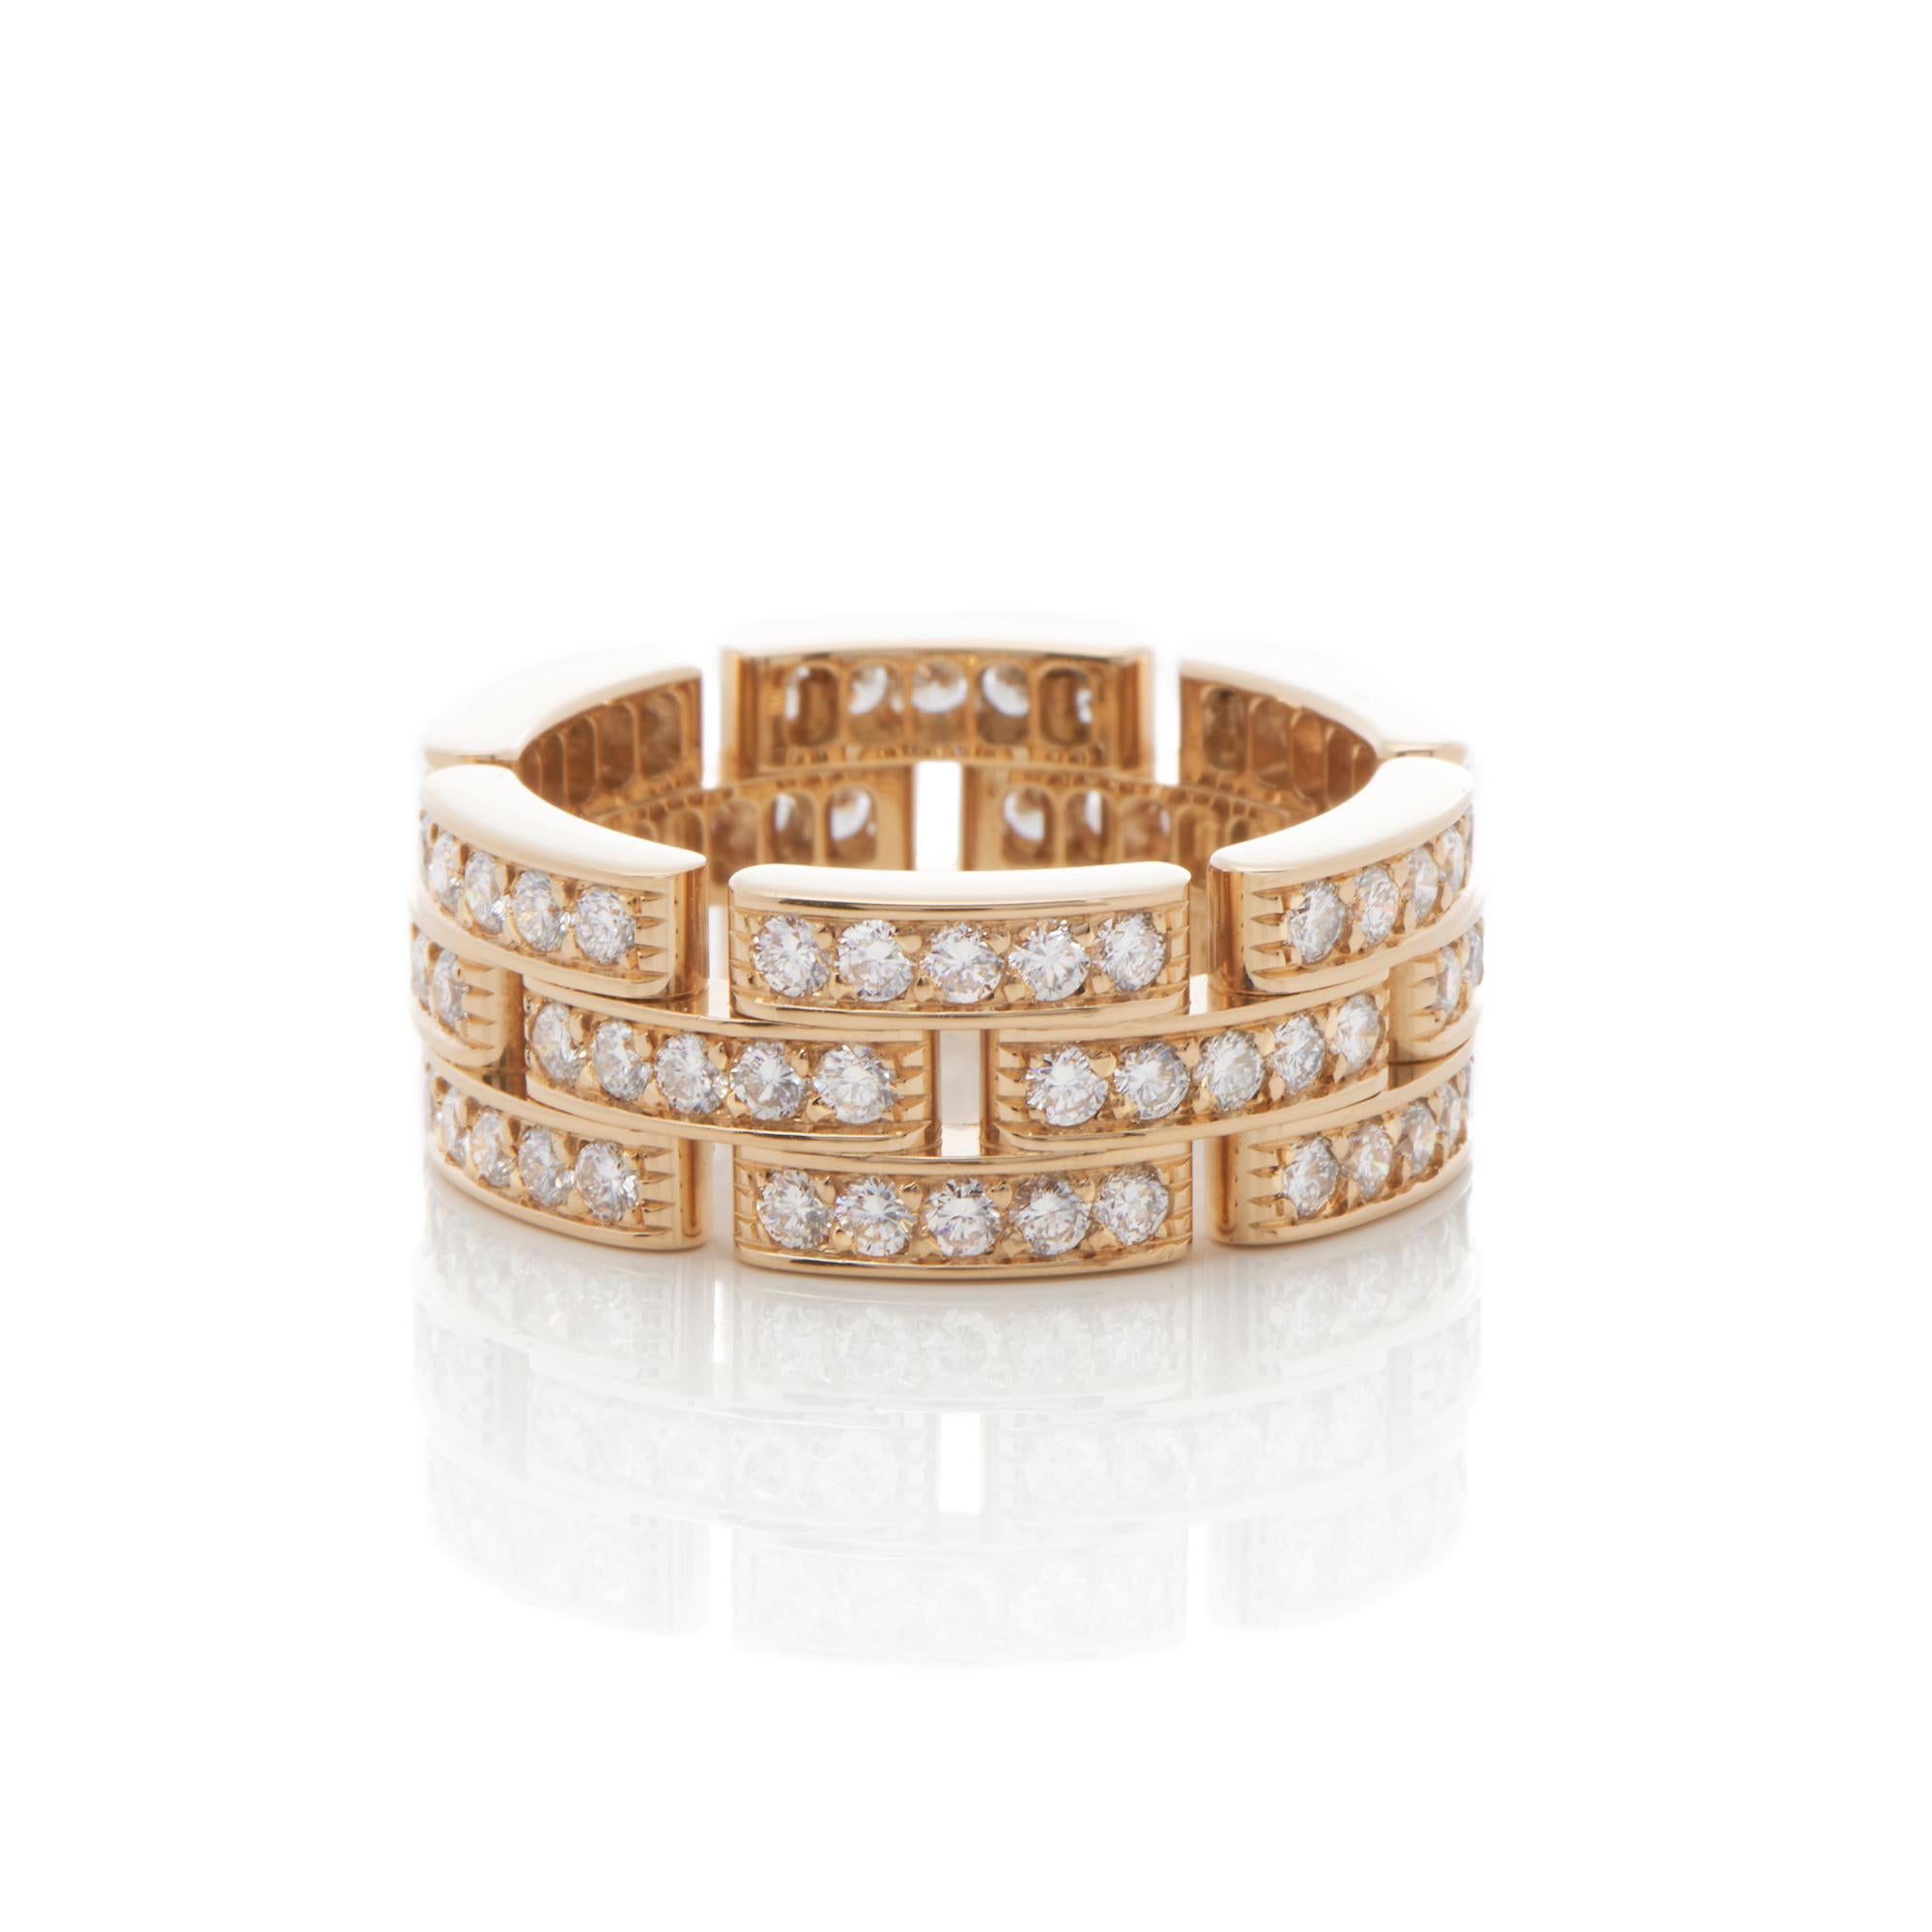 This ring by Cartier is from their Maillon Panthere collection and features their signature link design made in 18k yellow gold and 90 round brilliant cut diamonds totalling in 1.37ct. UK ring size N 1/2. EU ring size 54. US ring size 6 3/4.